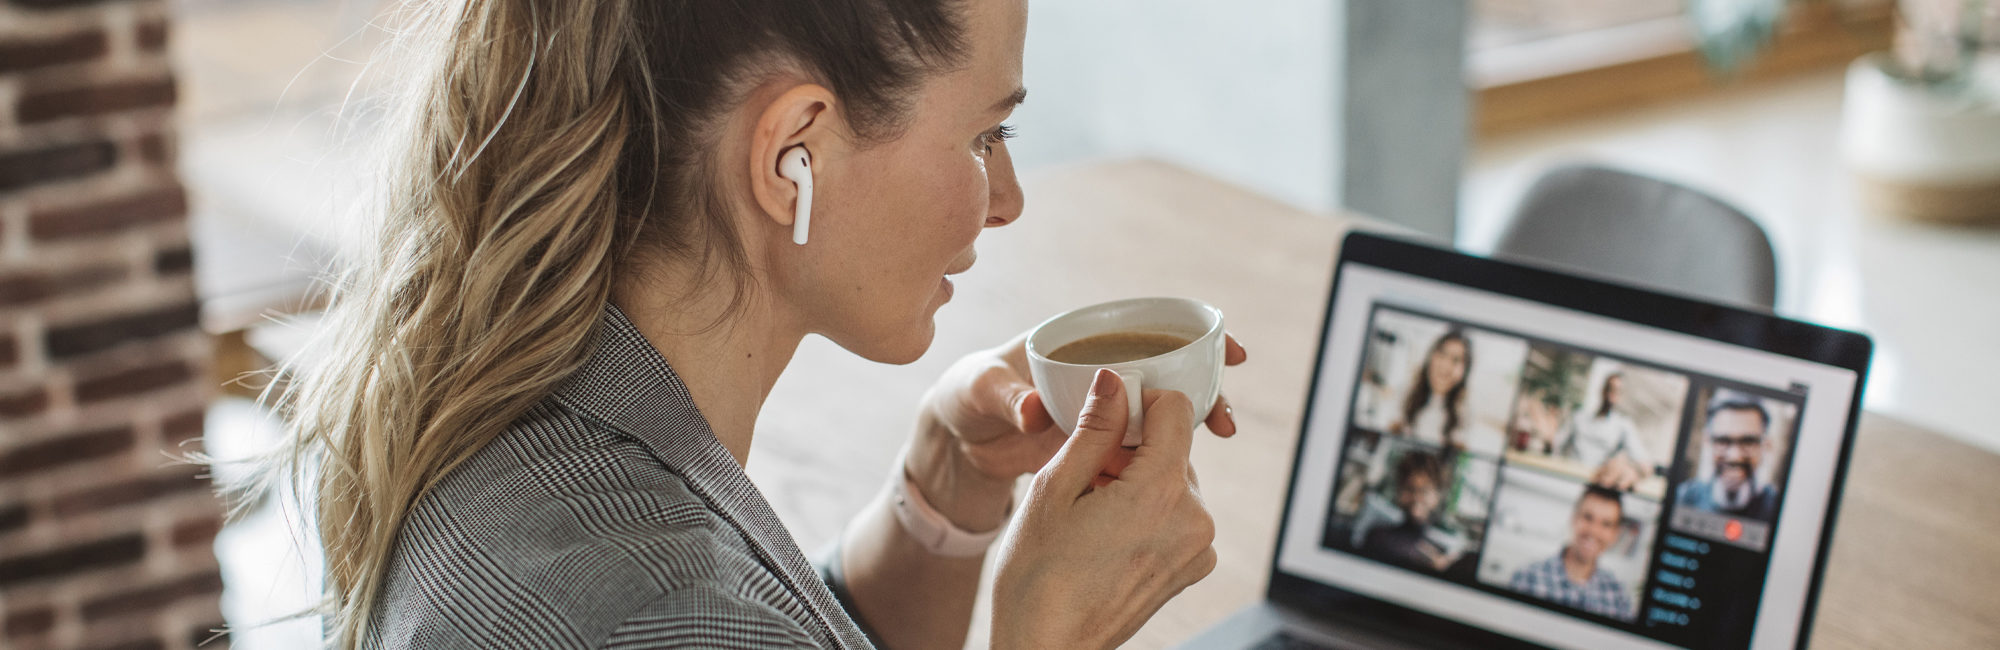 A woman on a conference call on laptop sipping a cup of coffee